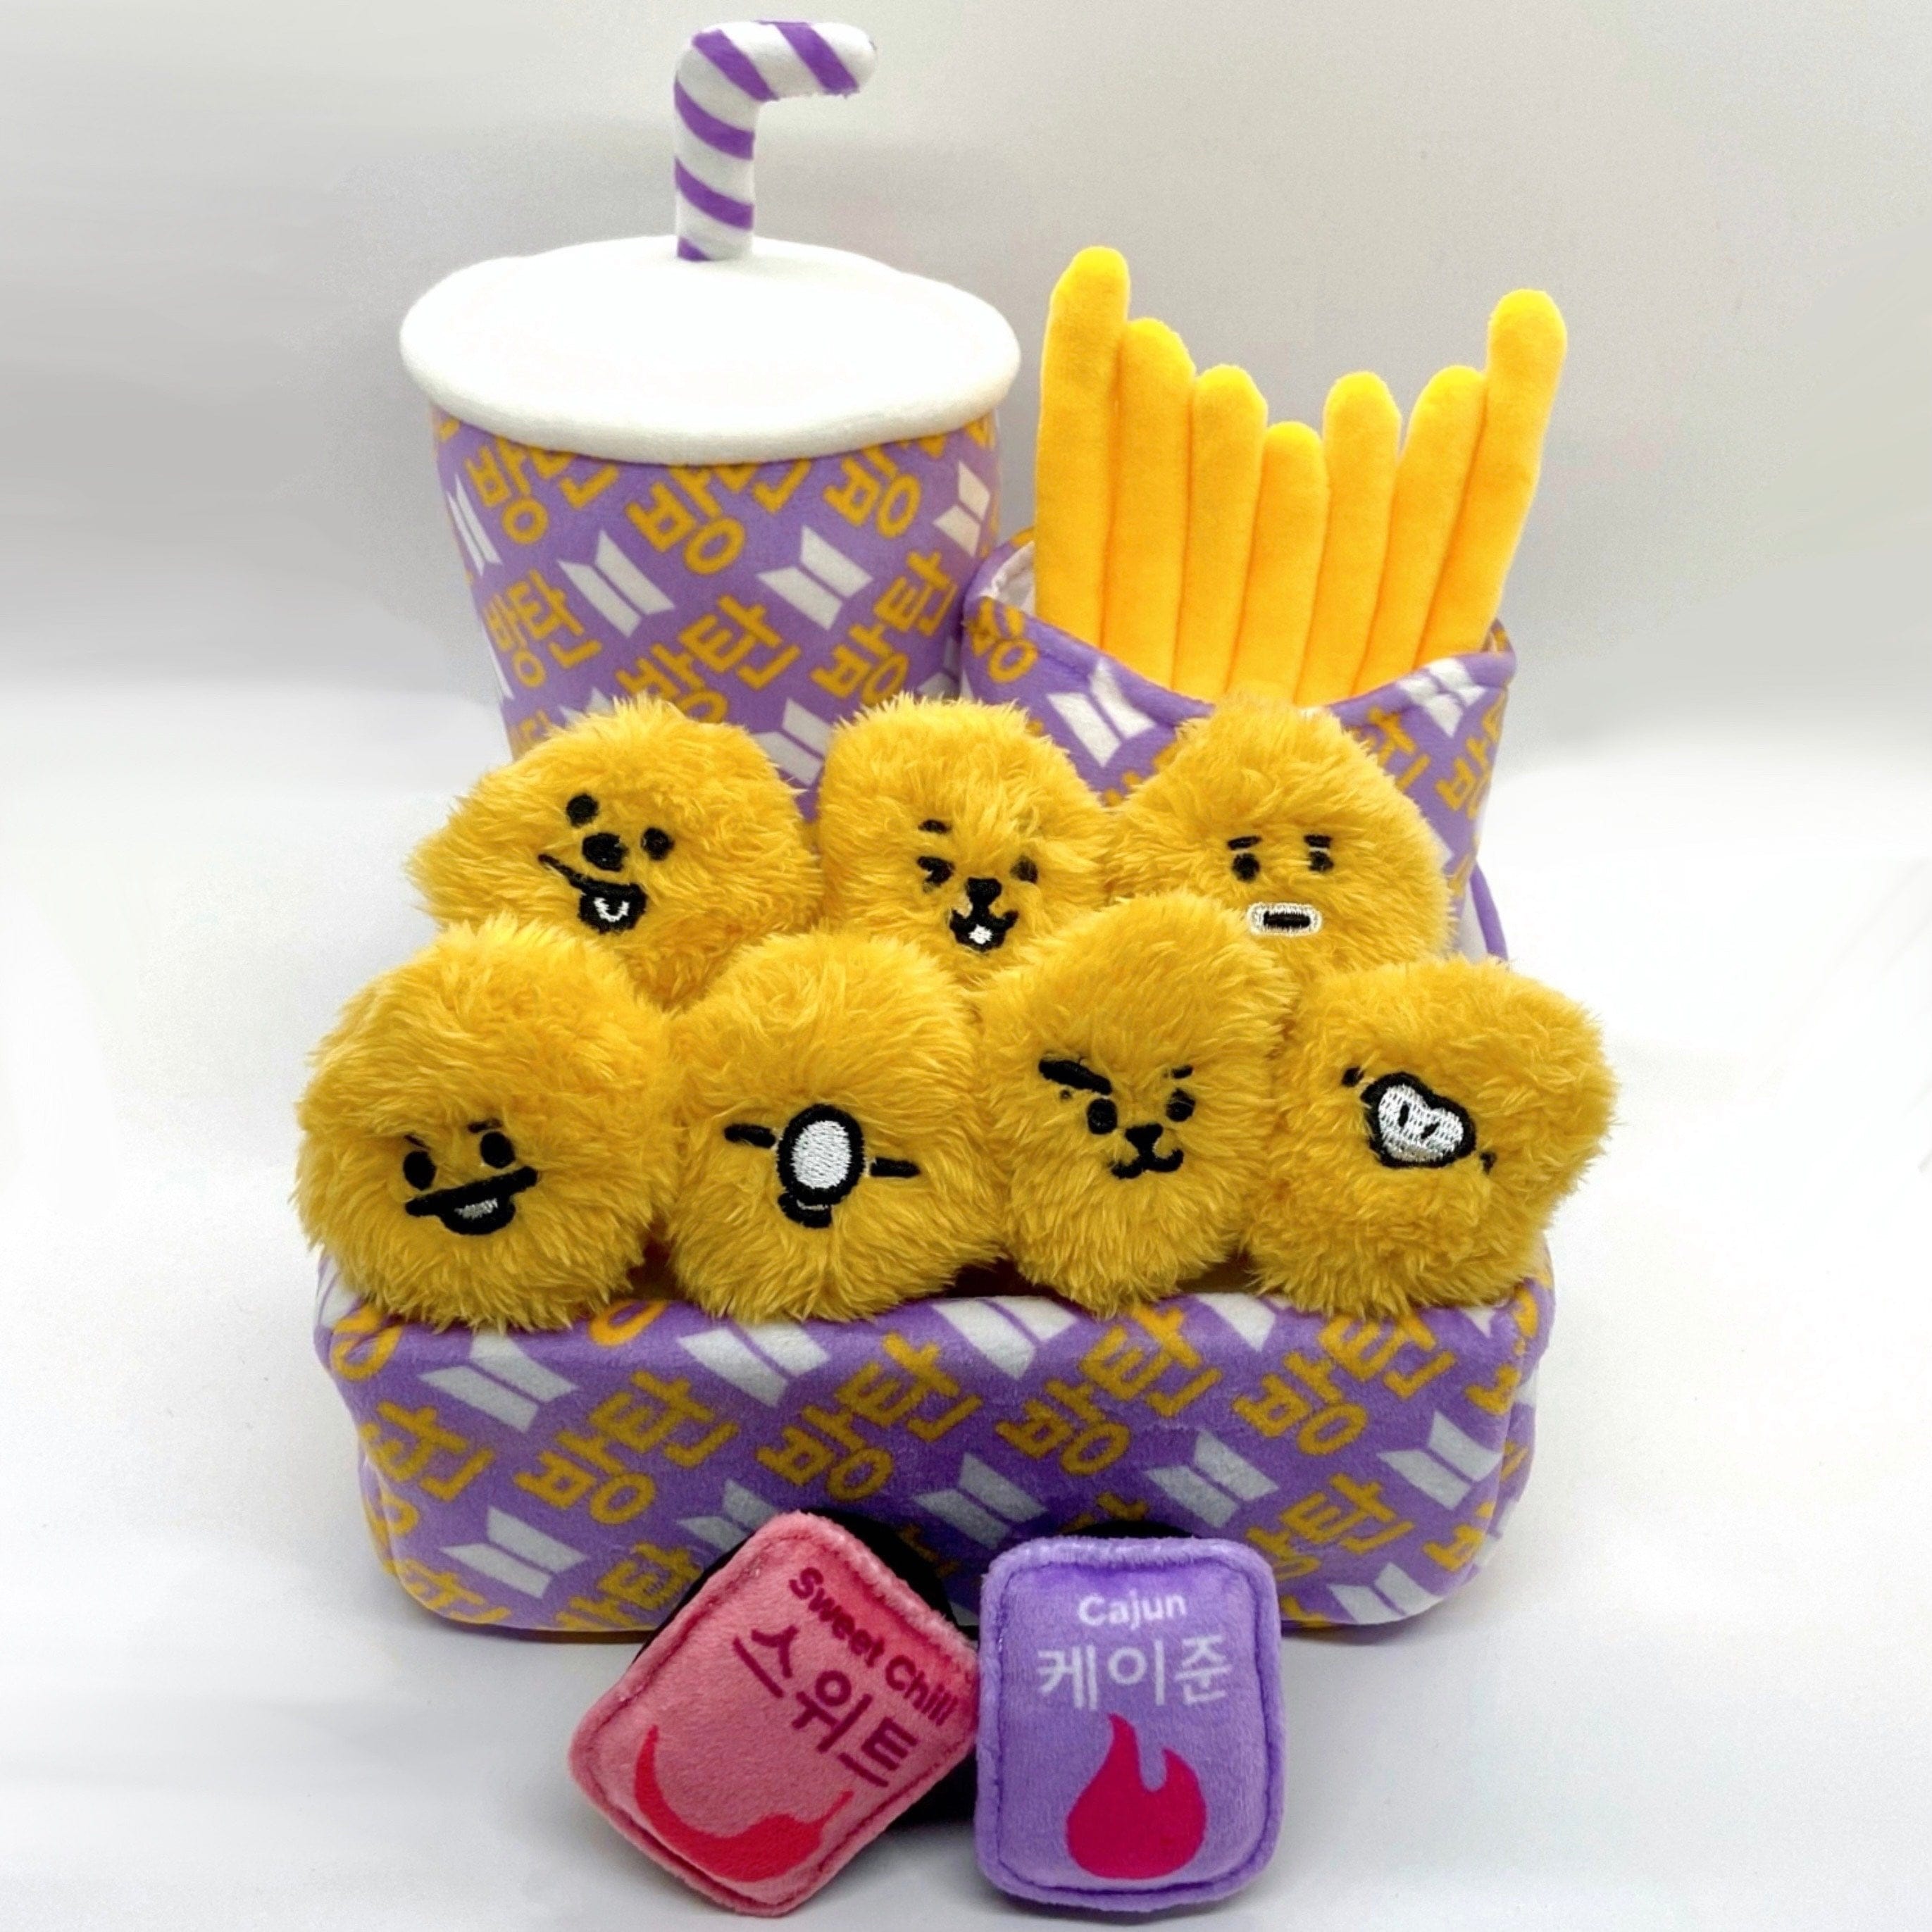 The Meal Plushie Set